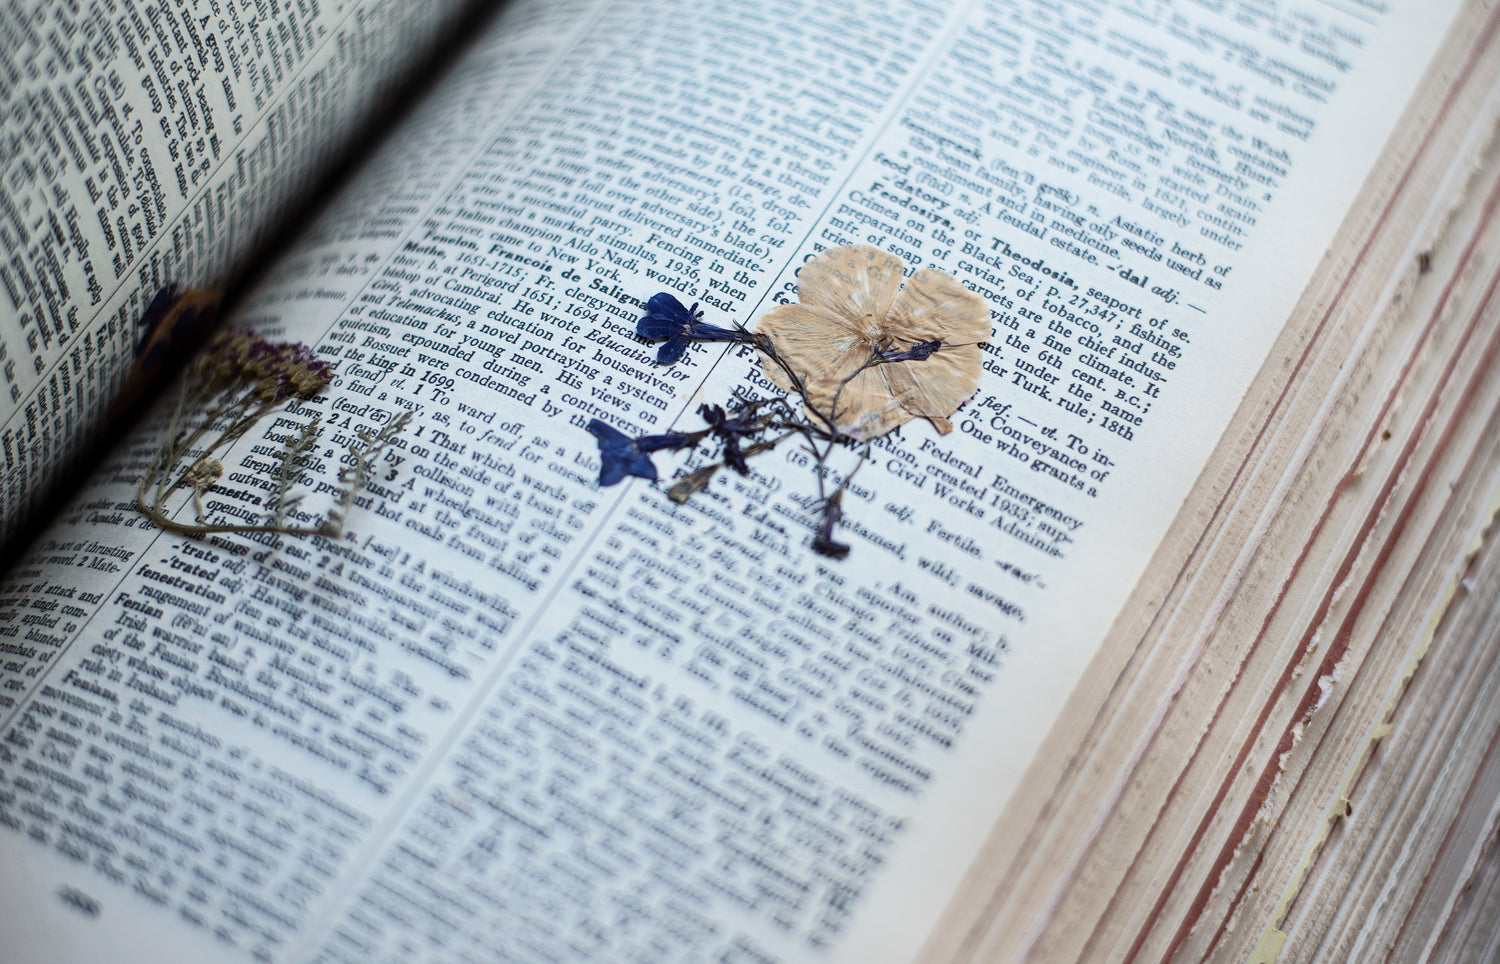 Open page of a dictionary, with pressed flower between pages